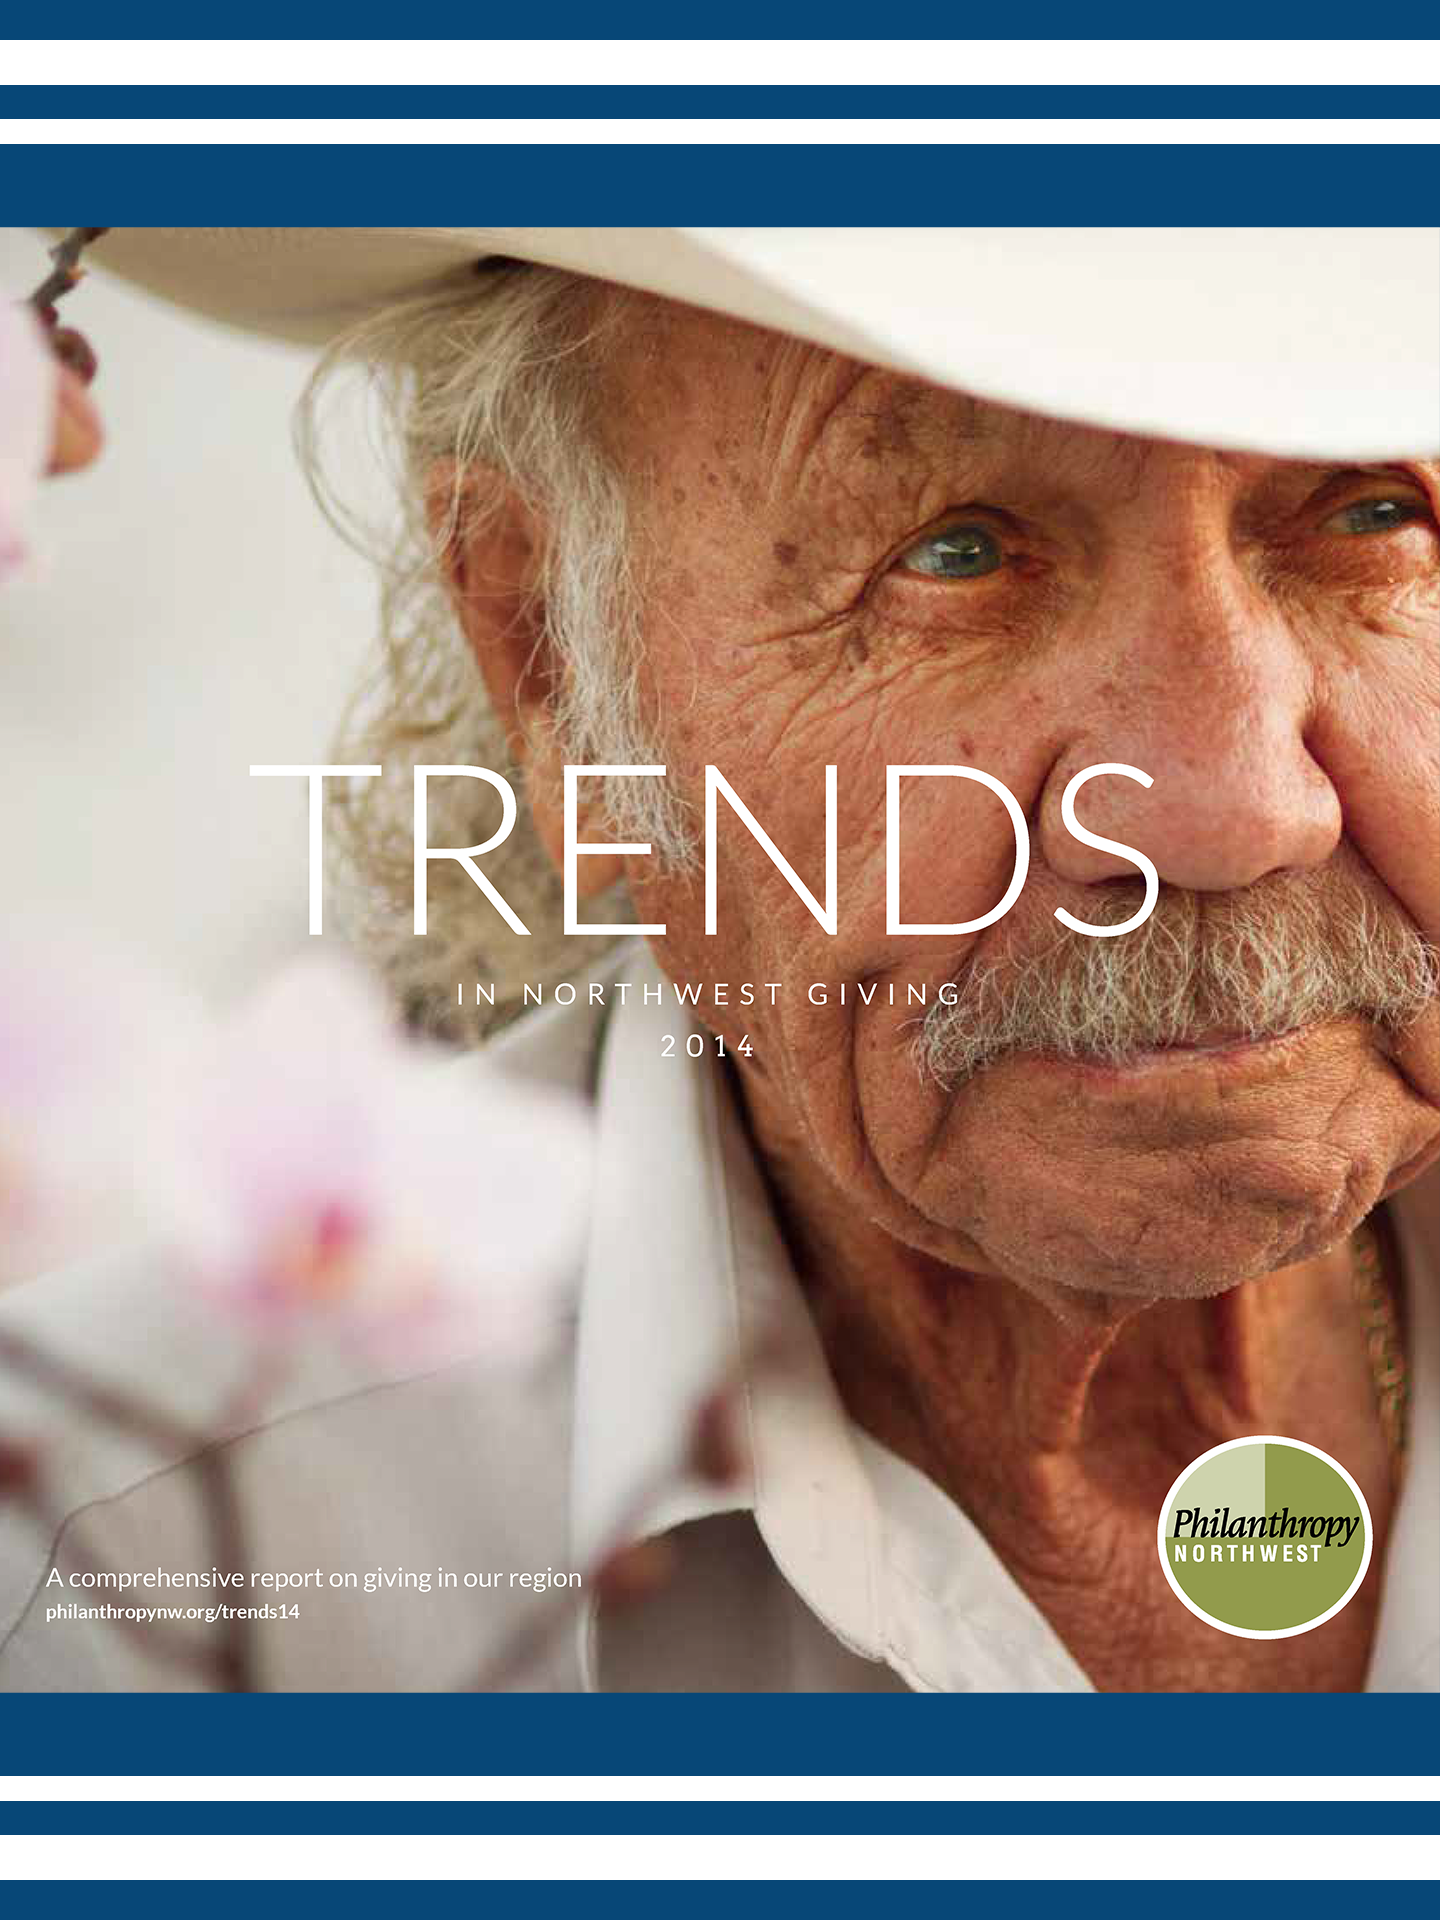 Cover image for Trends in NW Giving 2014 report-a elder man with gray hair and mustache wearing a white shirt and white cowboy hat